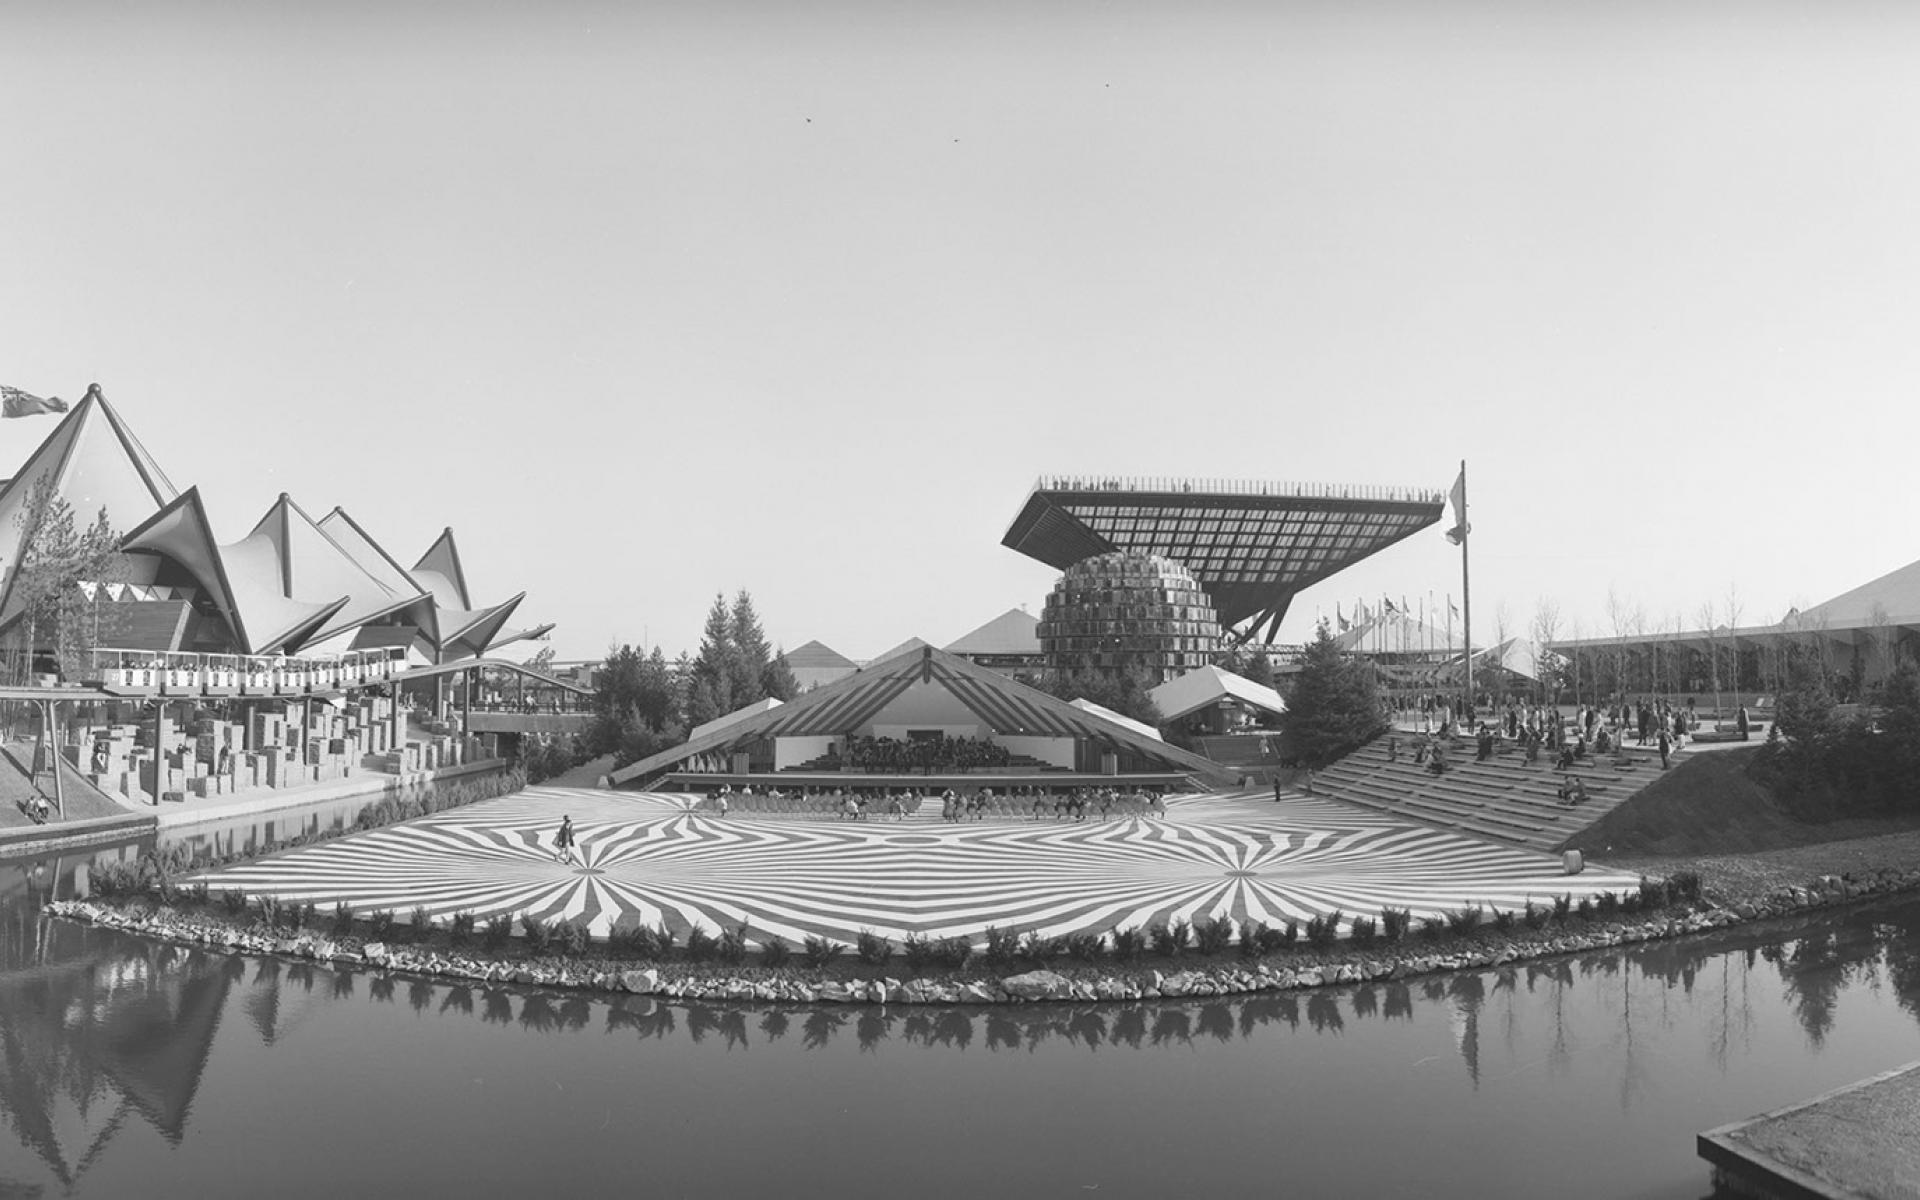 Ontario pavilion and Canadian pavilion at Expo 67